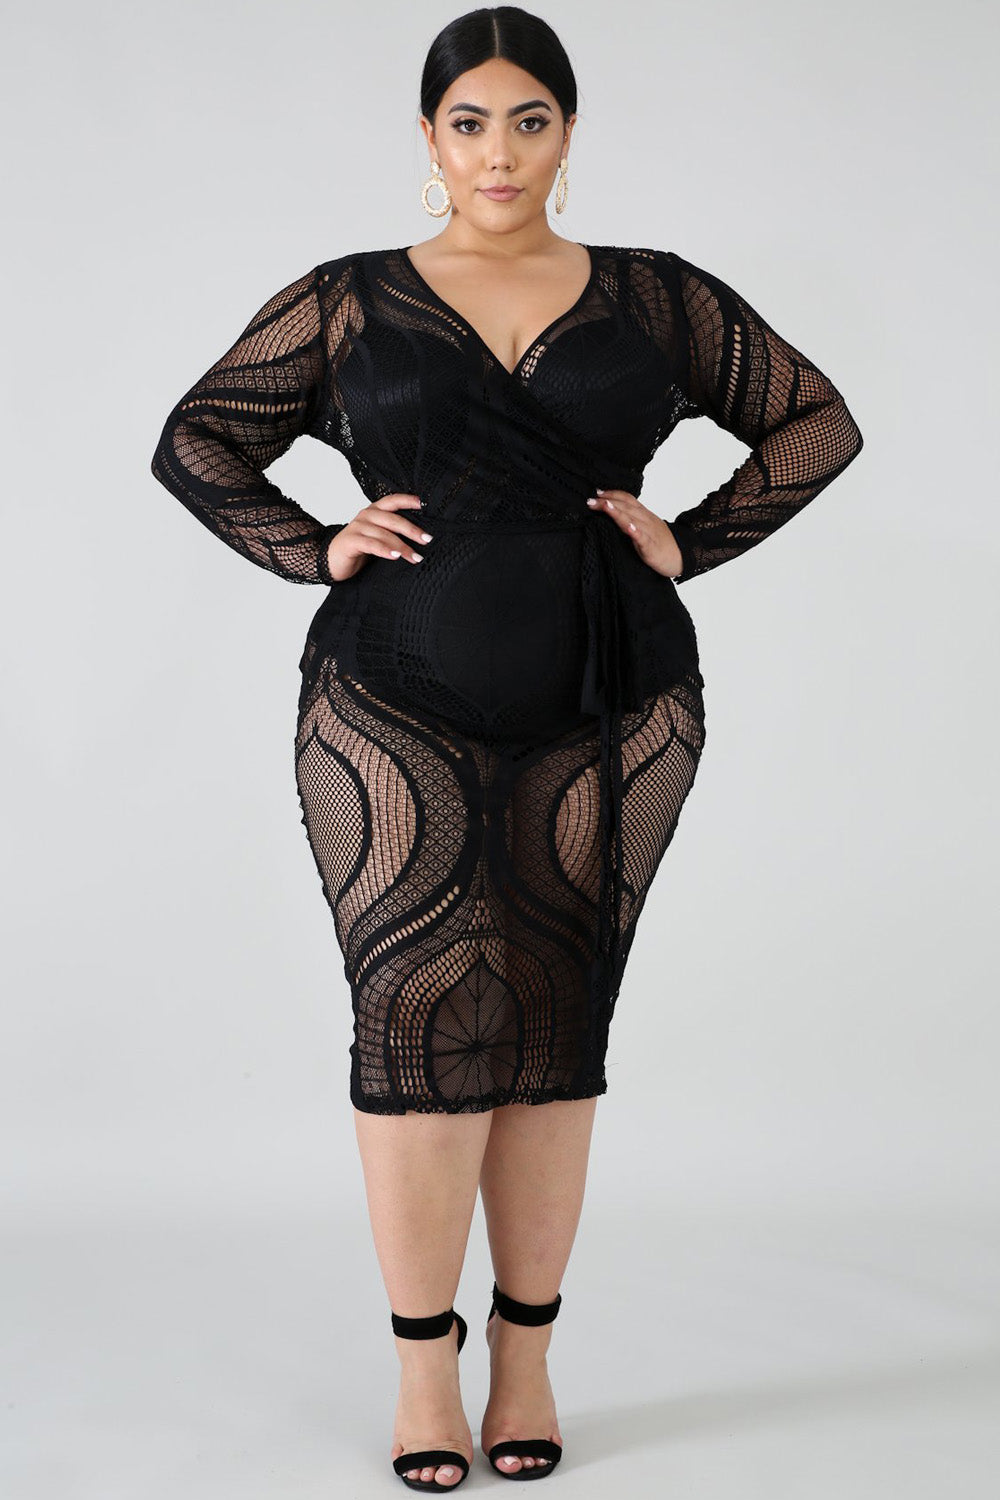 goPals sexy off the shoulder black plus size sheer lace dress. 